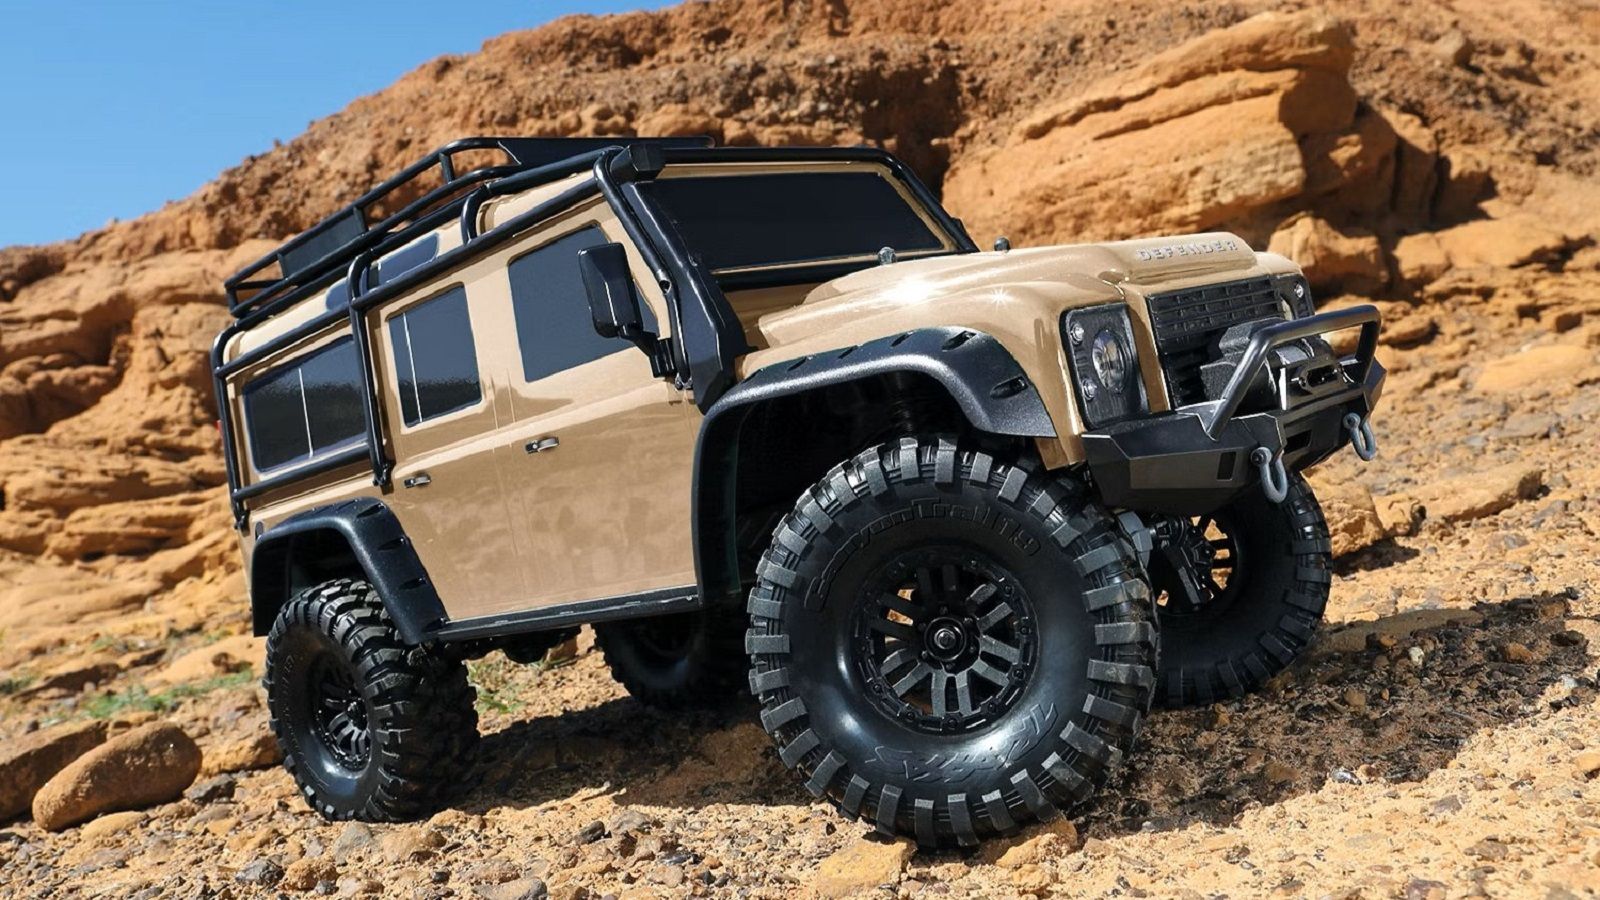 A parked Traxxas TRX-4 Defender